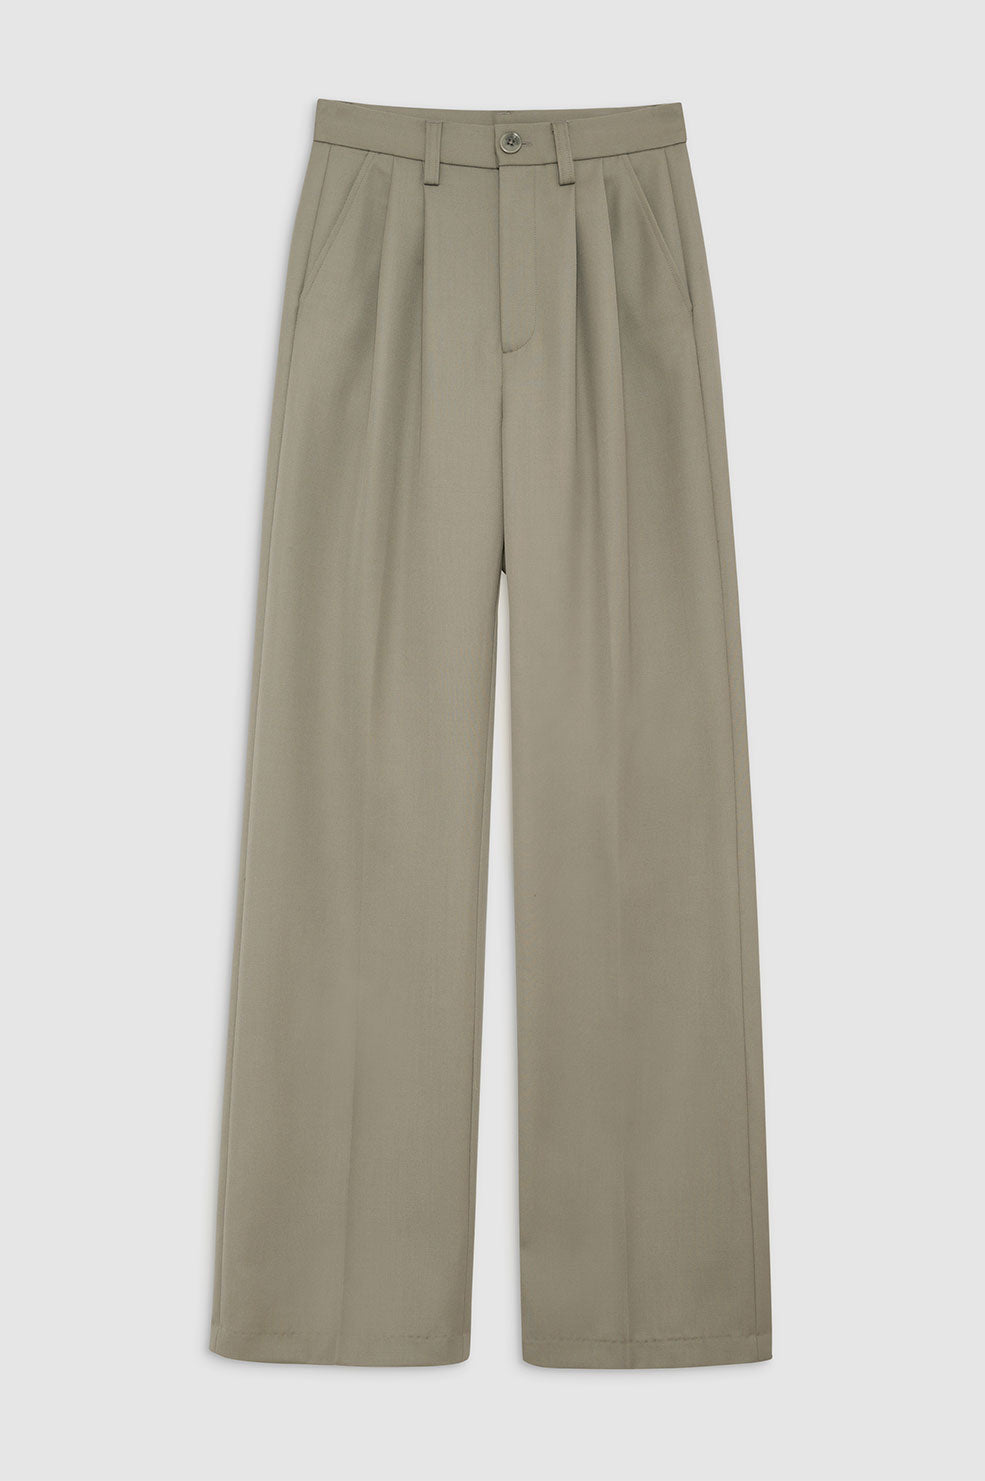 ANINE BING Carrie Pant - Green Khaki - Front View